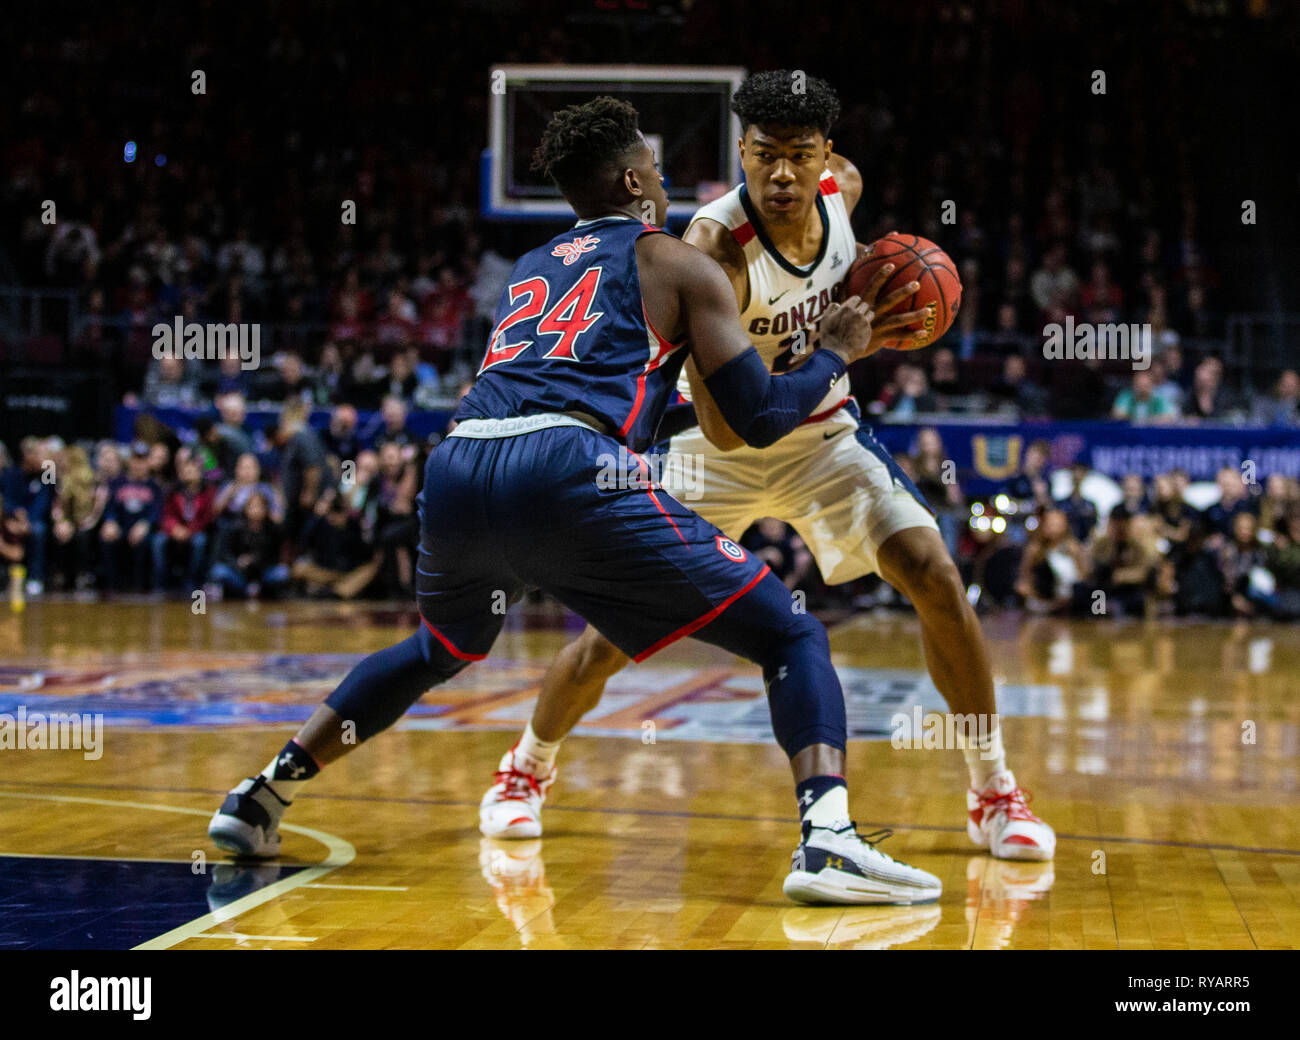 Mar 12 2019 Las Vegas, NV, U.S.A. Gonzaga forward Rui Hachimura (21) at the top of the key during the NCAA West Coast Conference Men's Basketball Tournament championship between the Gonzaga Bulldogs and the Saint Mary's Gaels 47-60 lost at Orleans Arena Las Vegas, NV. Thurman James/CSM Stock Photo